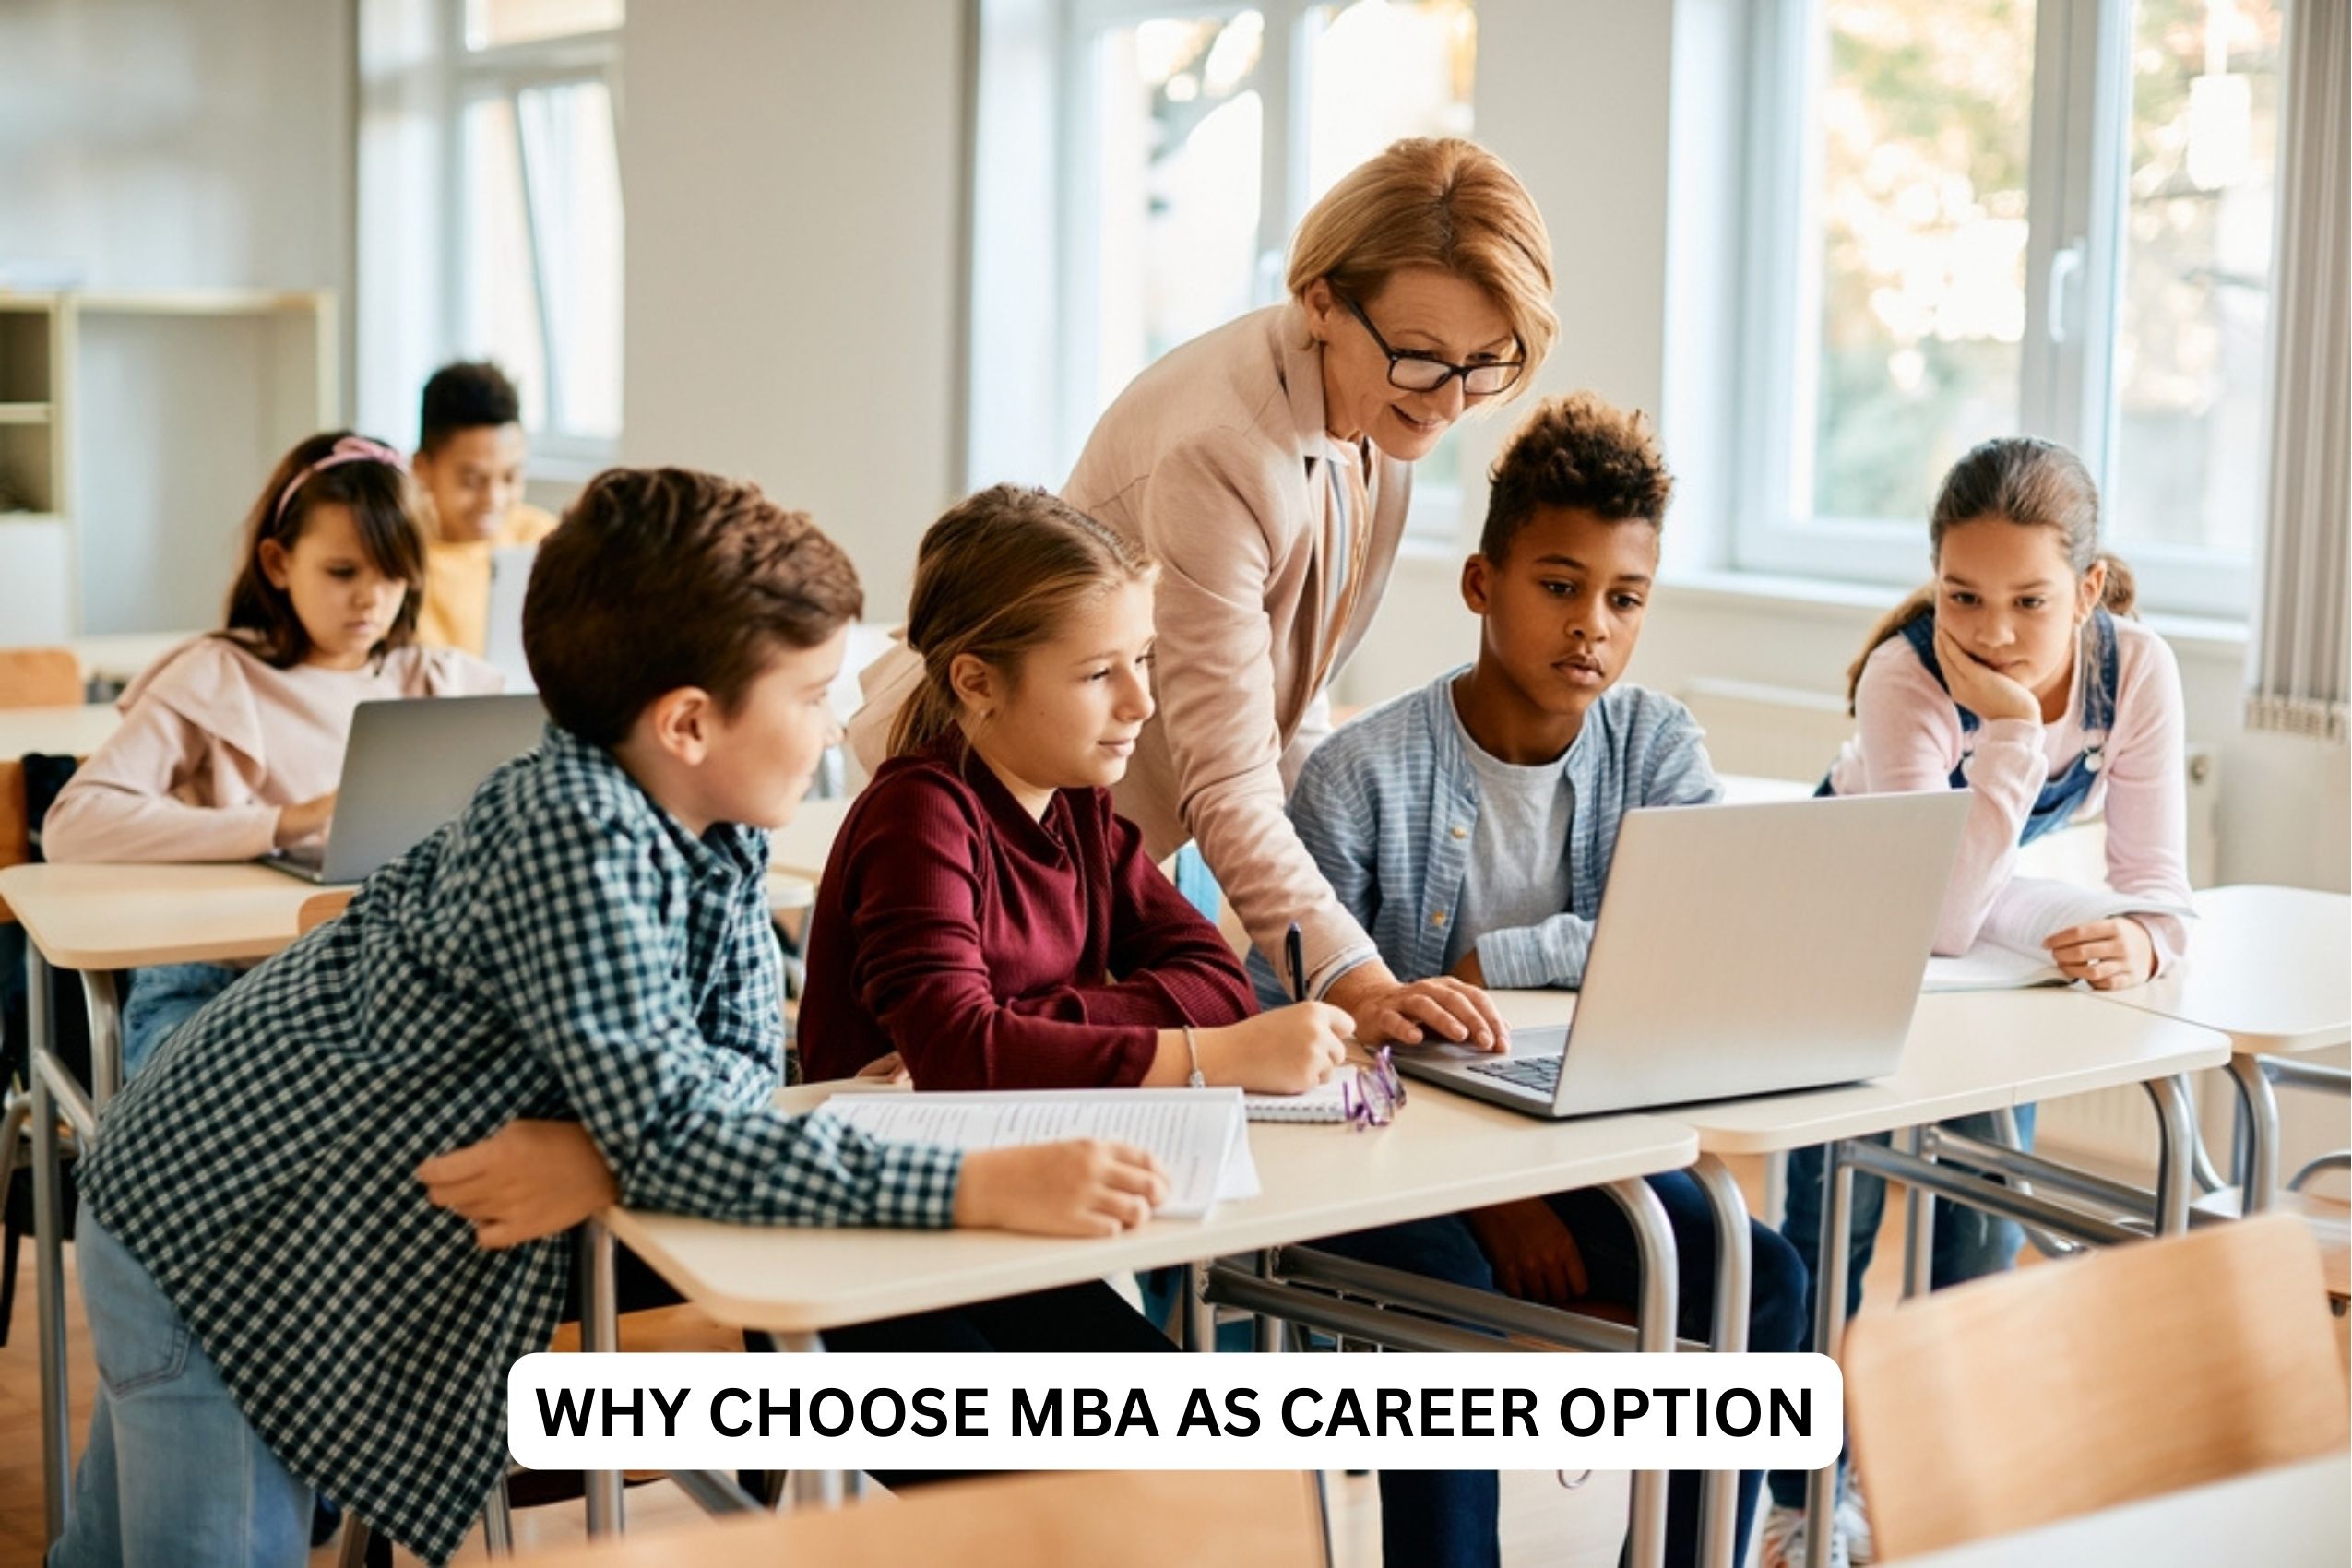 WHY CHOOSE MBA AS CAREER OPTION